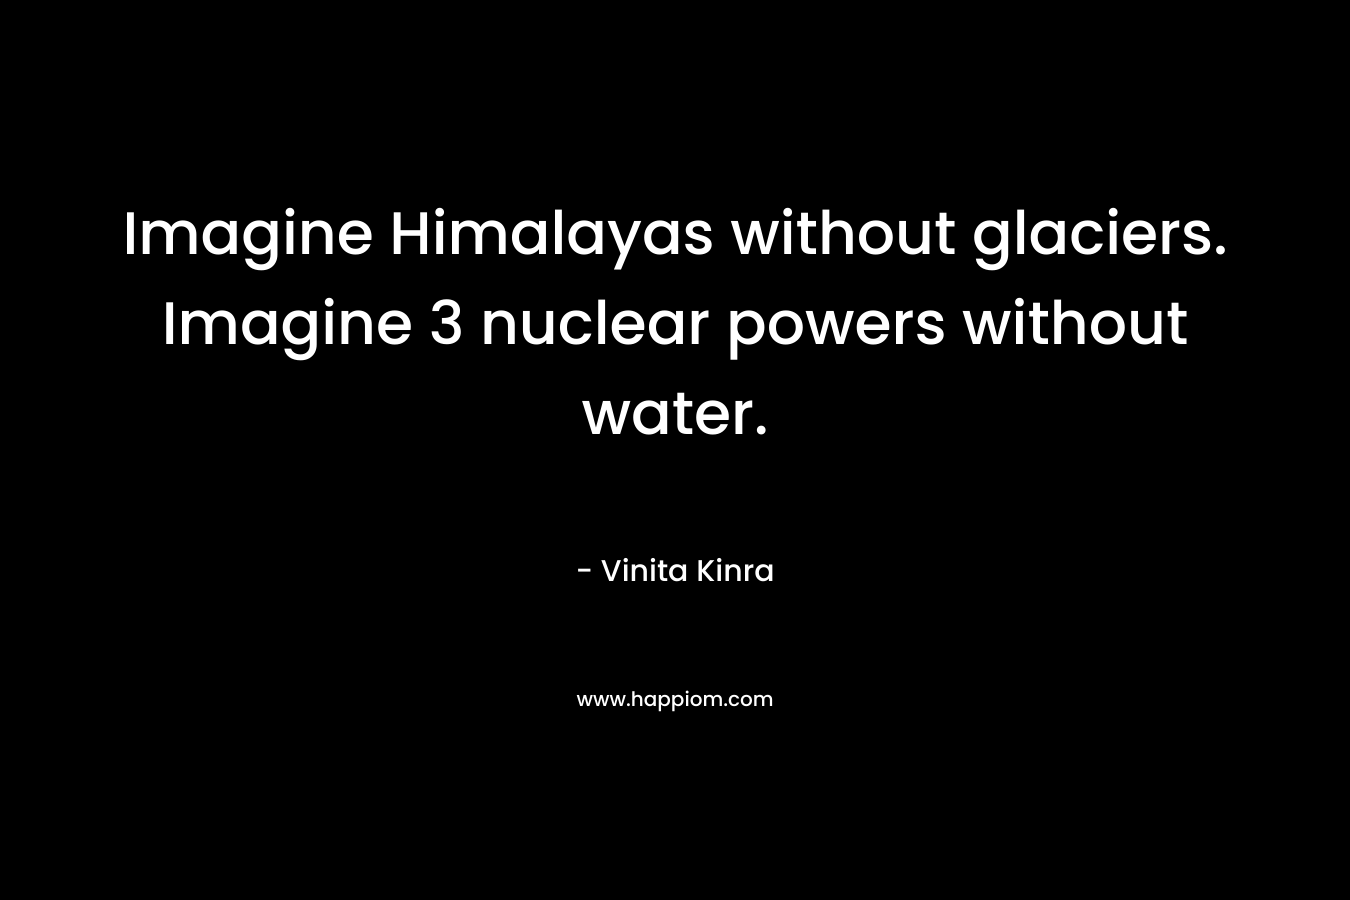 Imagine Himalayas without glaciers. Imagine 3 nuclear powers without water.